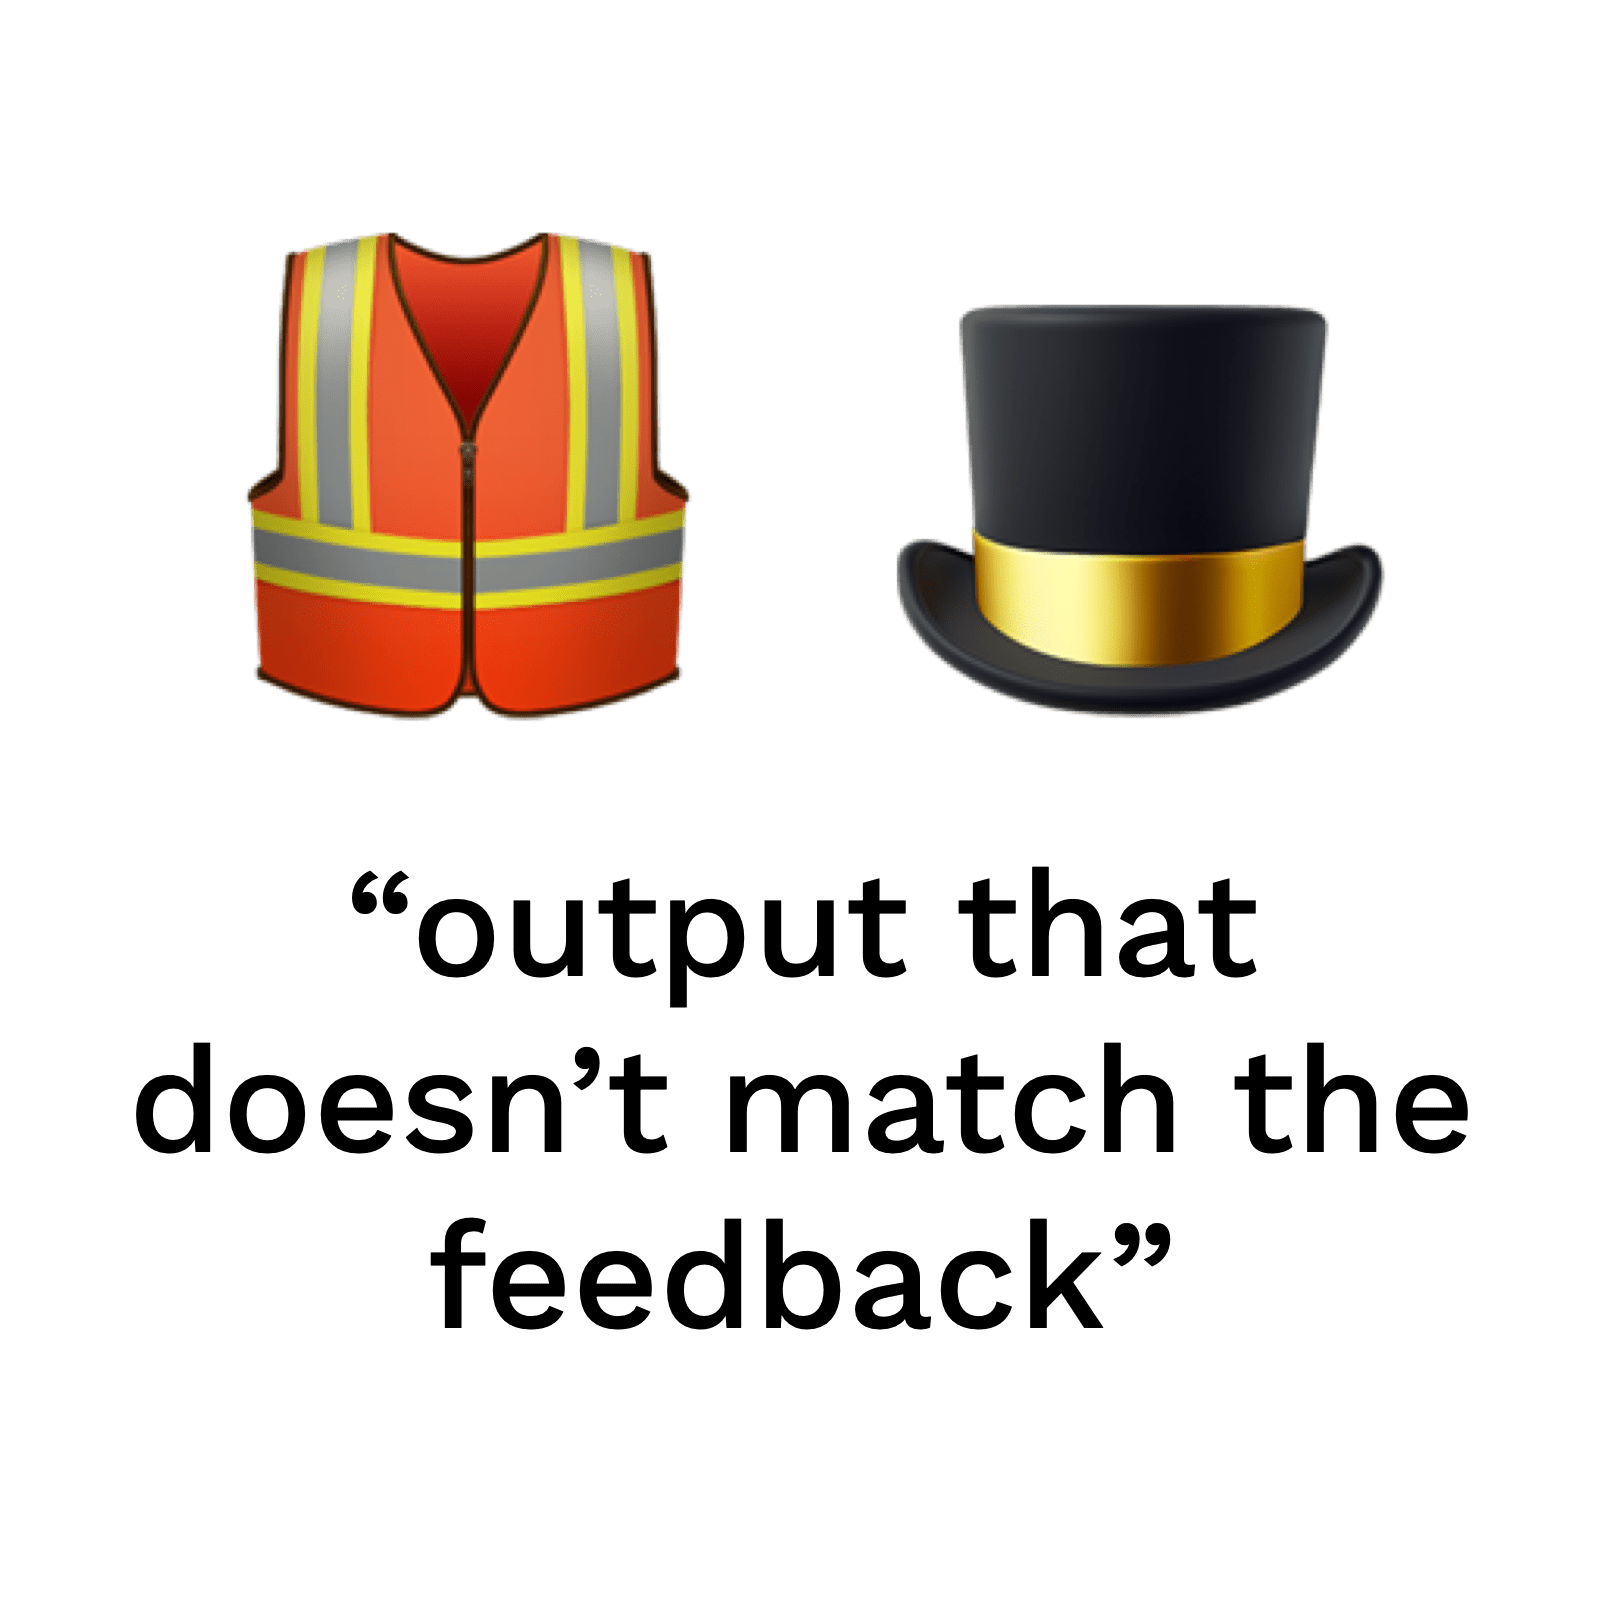 "output that doesn't match the feedback"